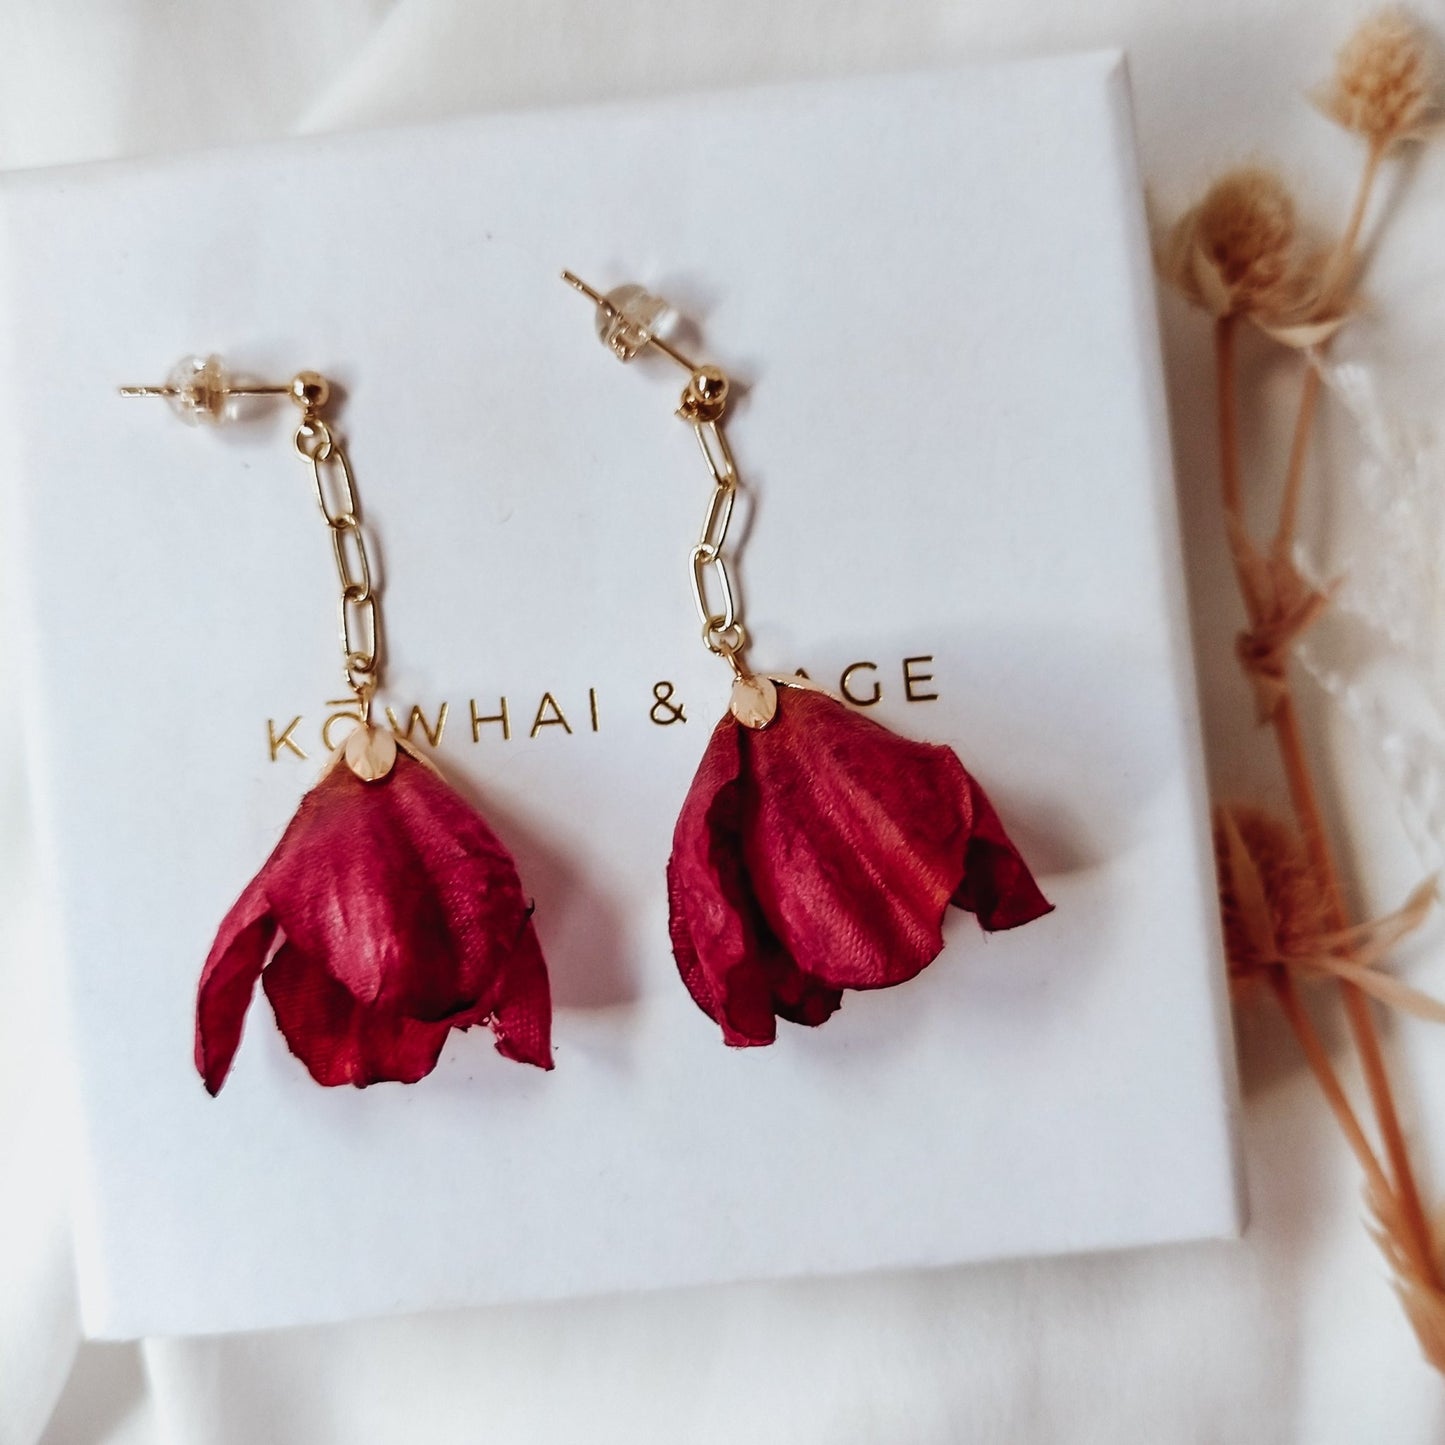 Floral Earrings - Kowhai and Sage